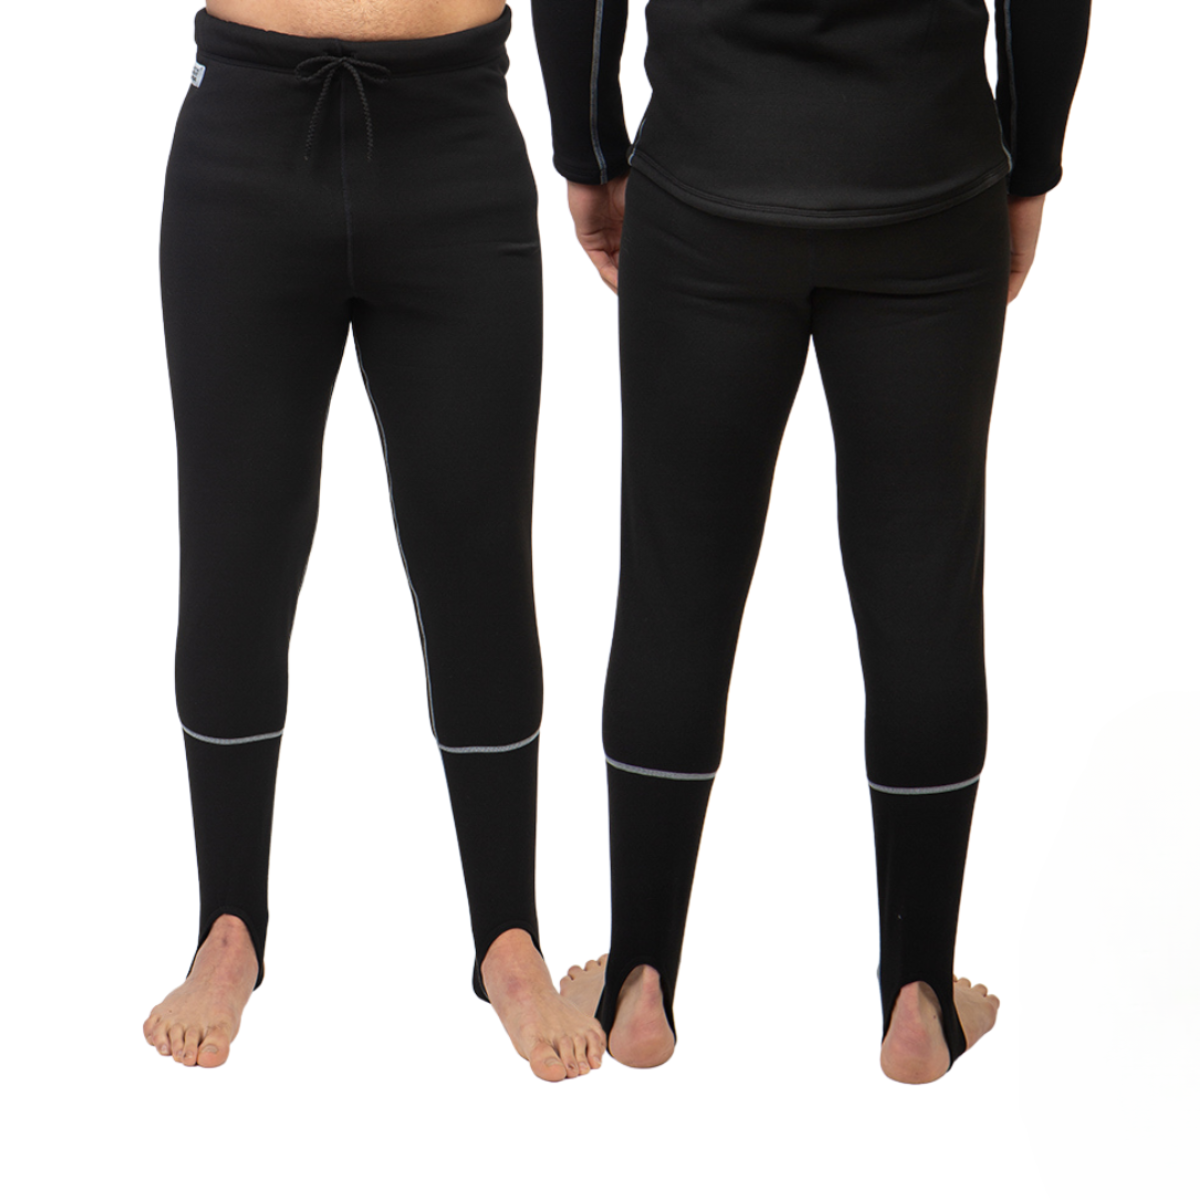 Fourth Element Thermocline 2 Mens Leggings